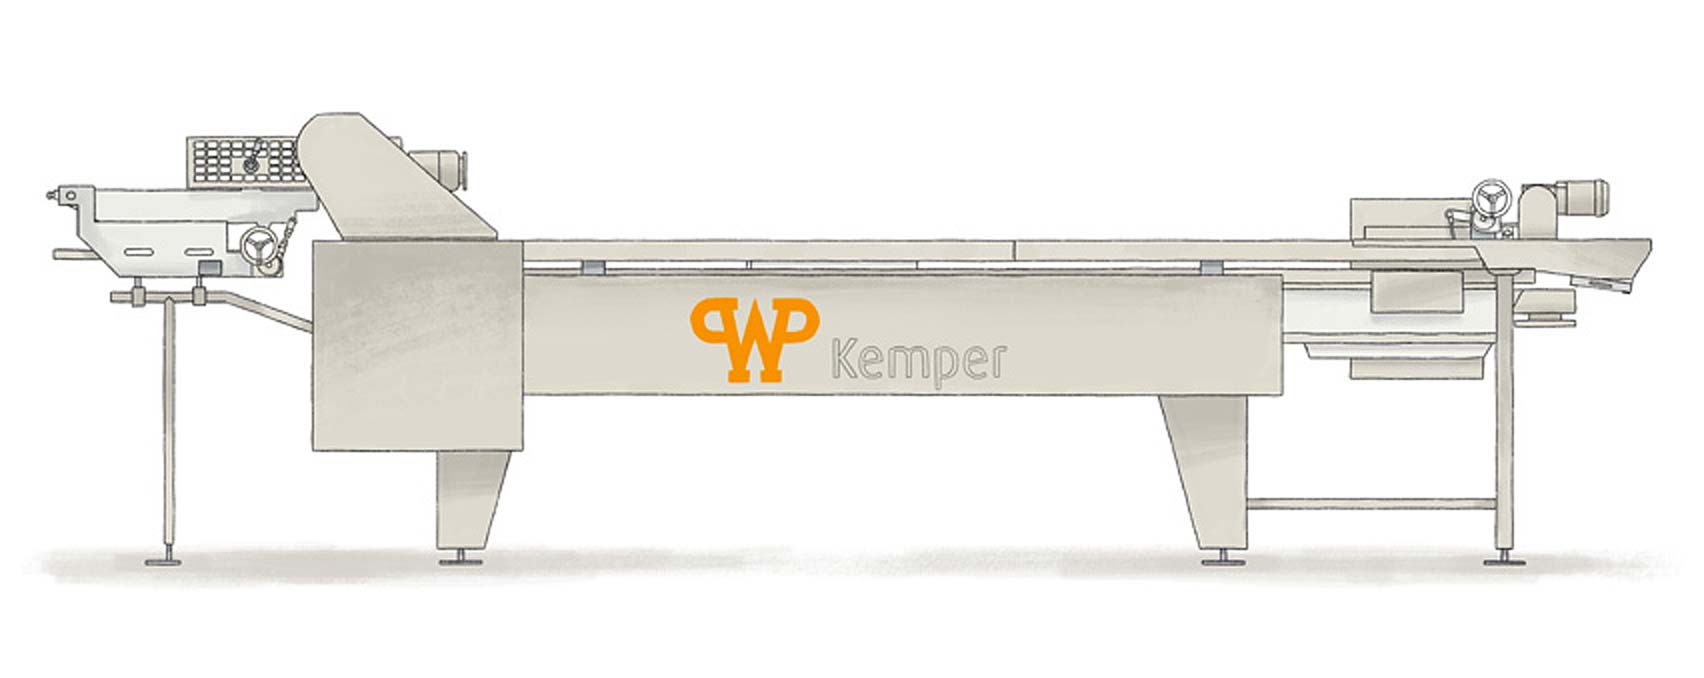 WP Kemper LARGO S Fryer, WP Bakery Group USA, Retail, Wholesale and Industrial Bakery Equipment and Food Service Industry Equipment, Shelton, CT